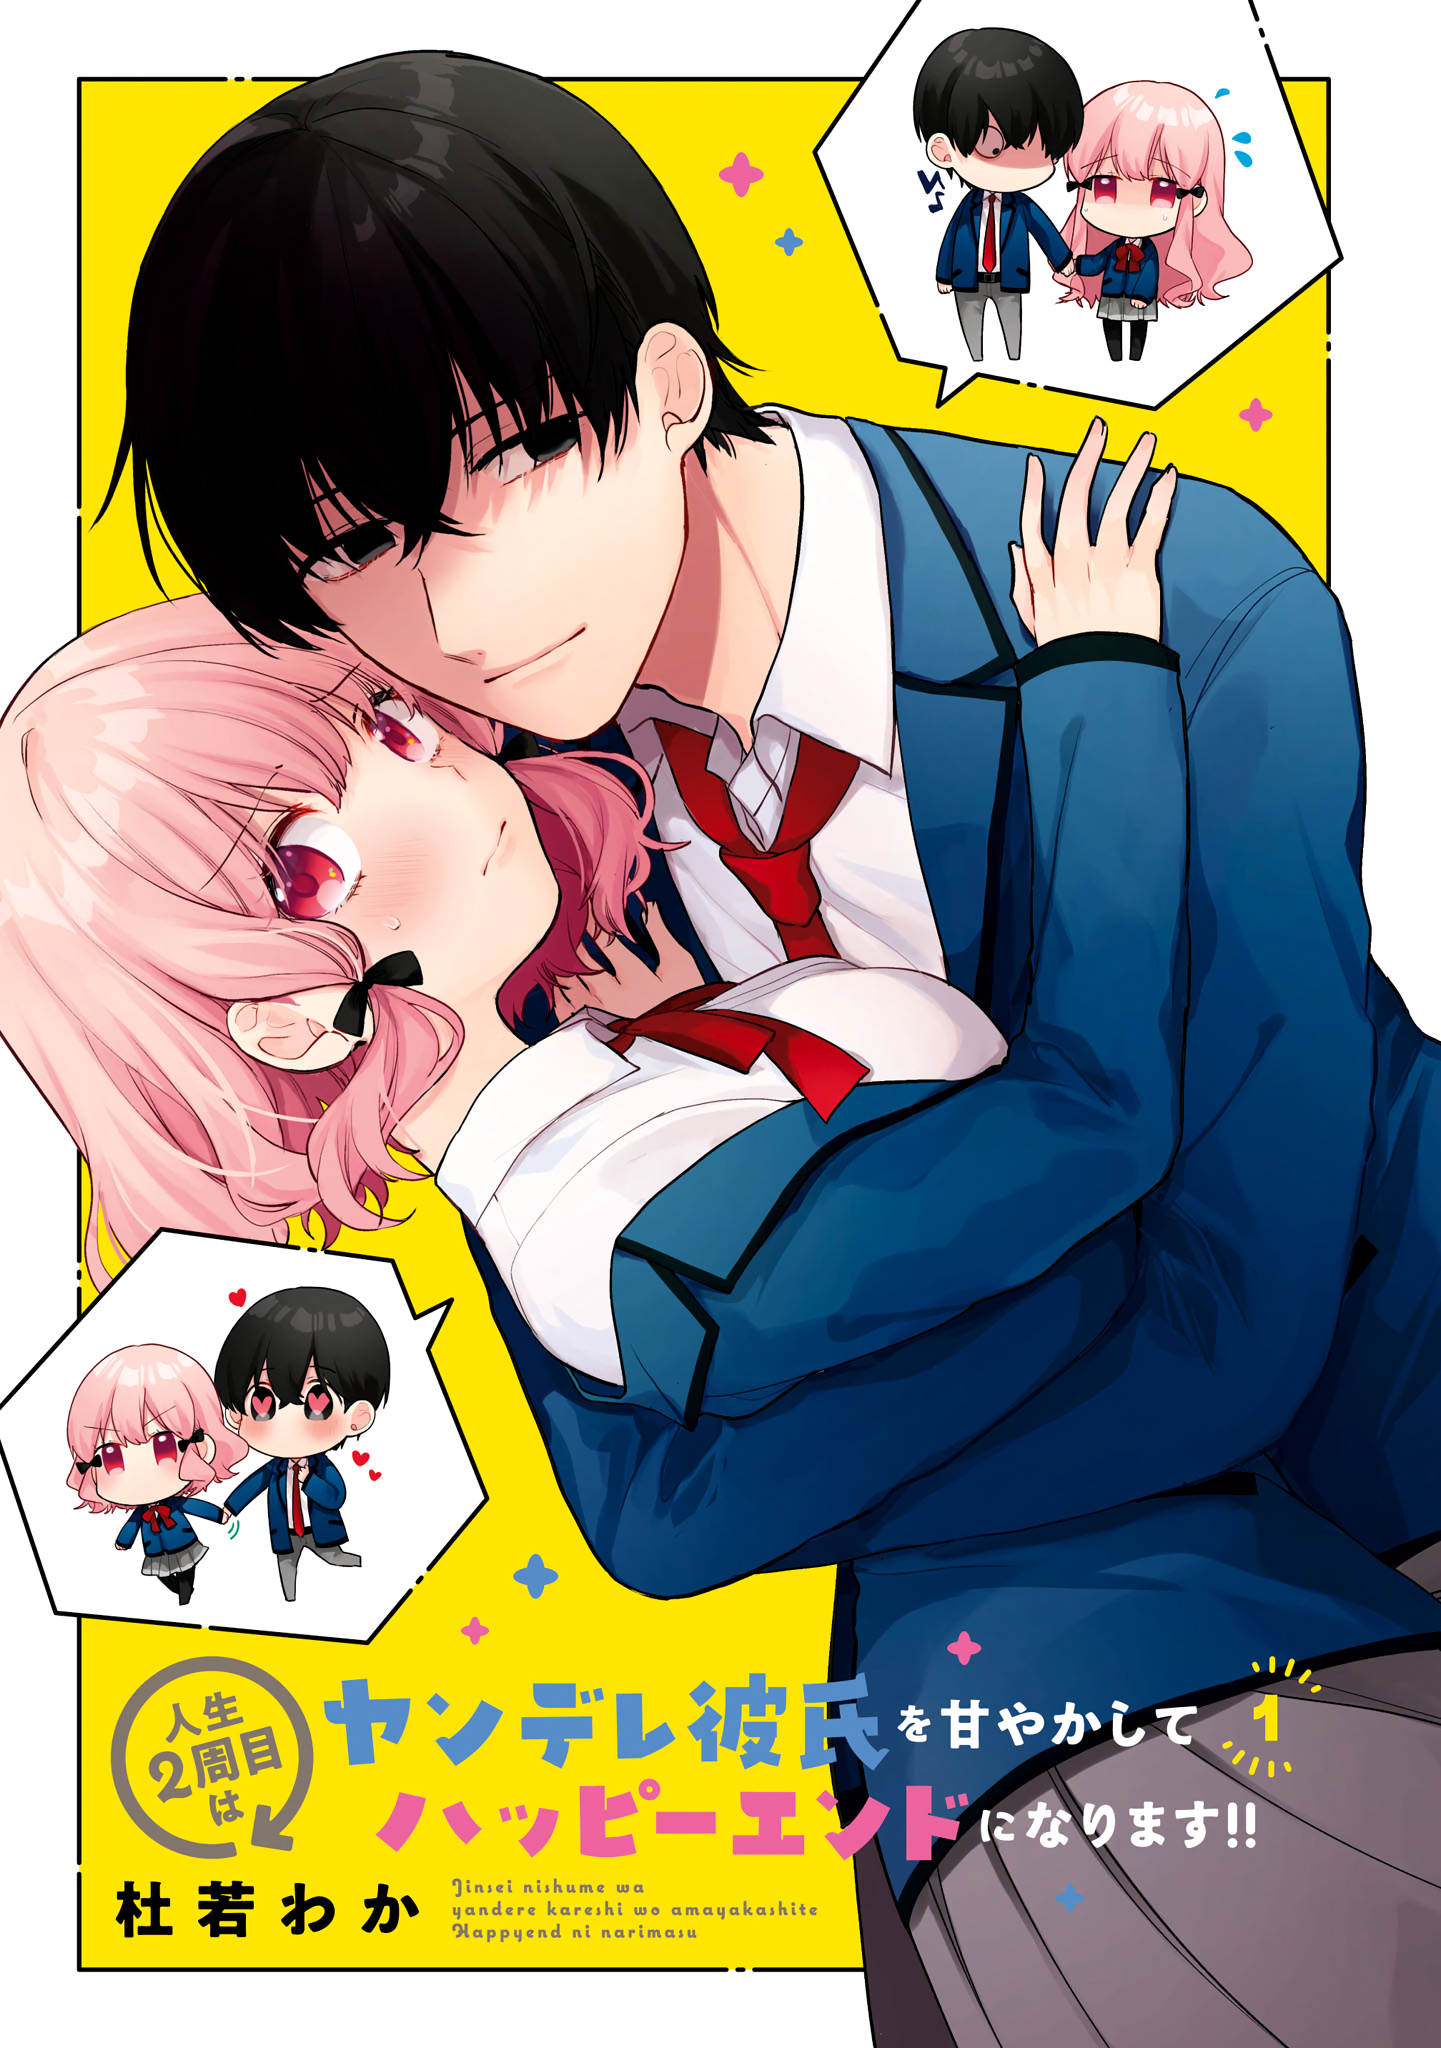 I Have A Second Chance At Life, So I’Ll Pamper My Yandere Boyfriend For A Happy Ending!! Chapter 1 #5